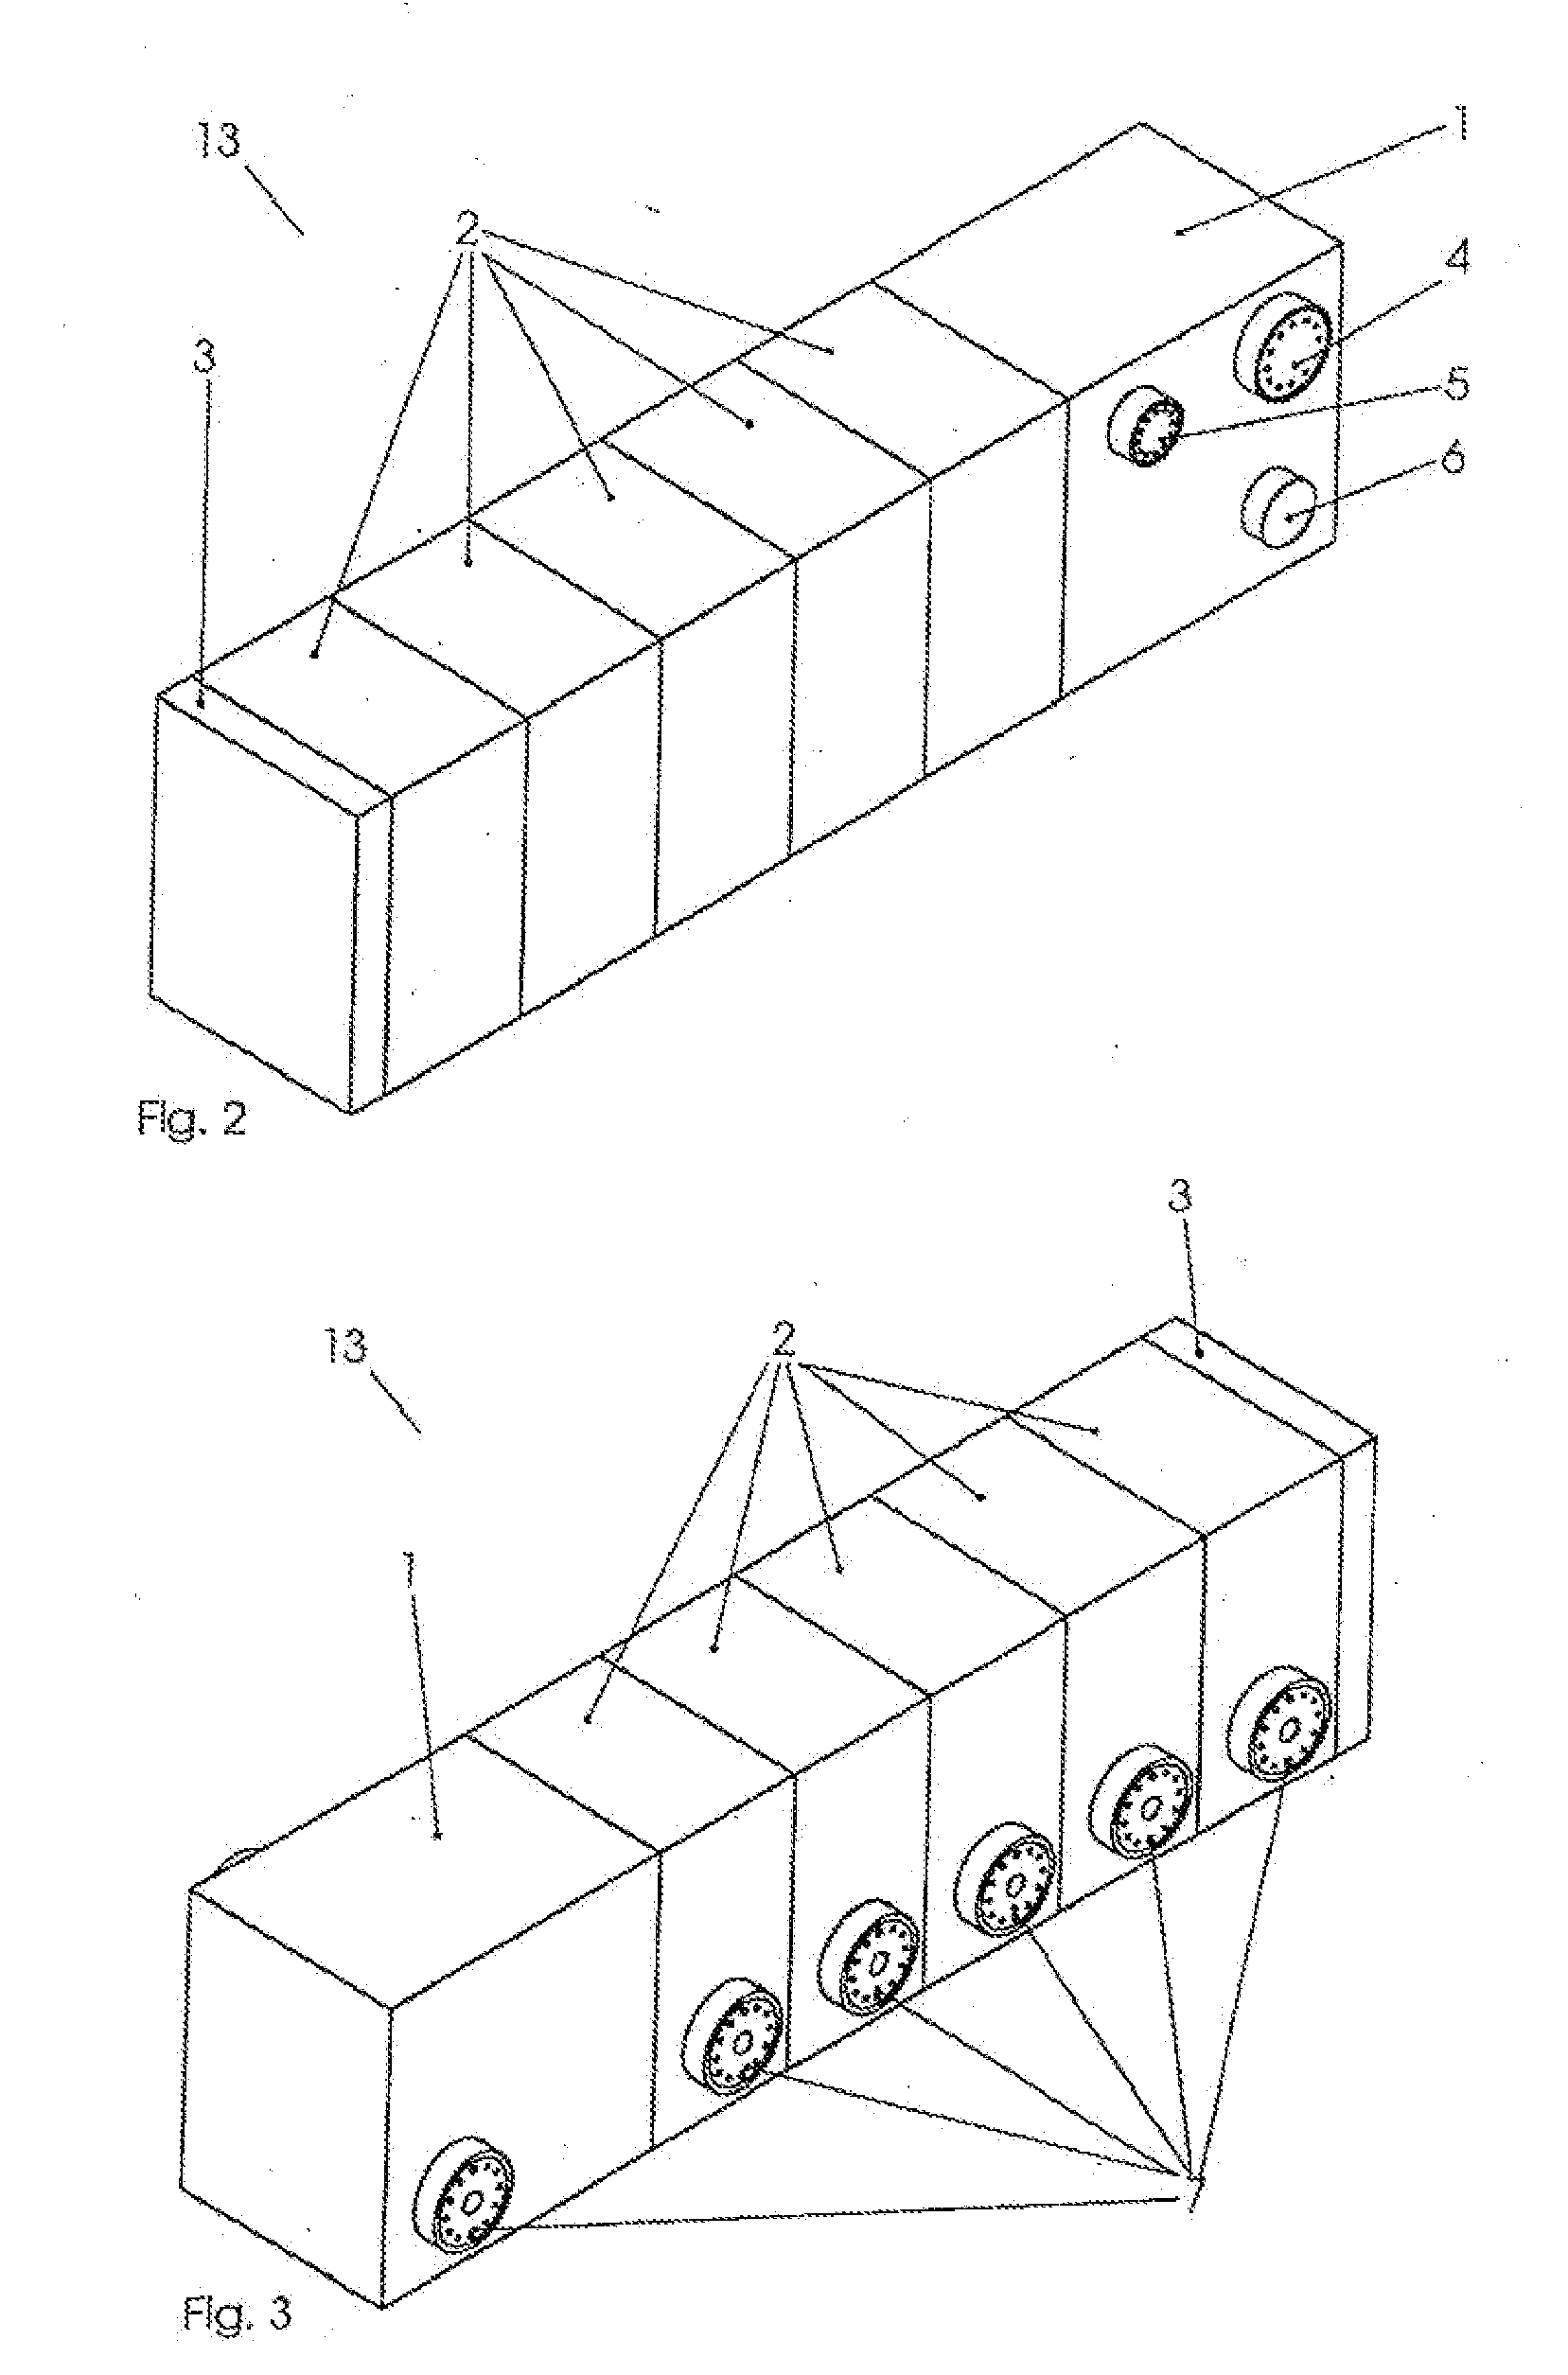 Hybrid universal distribution system comprising electrical, fluid, and communication functions